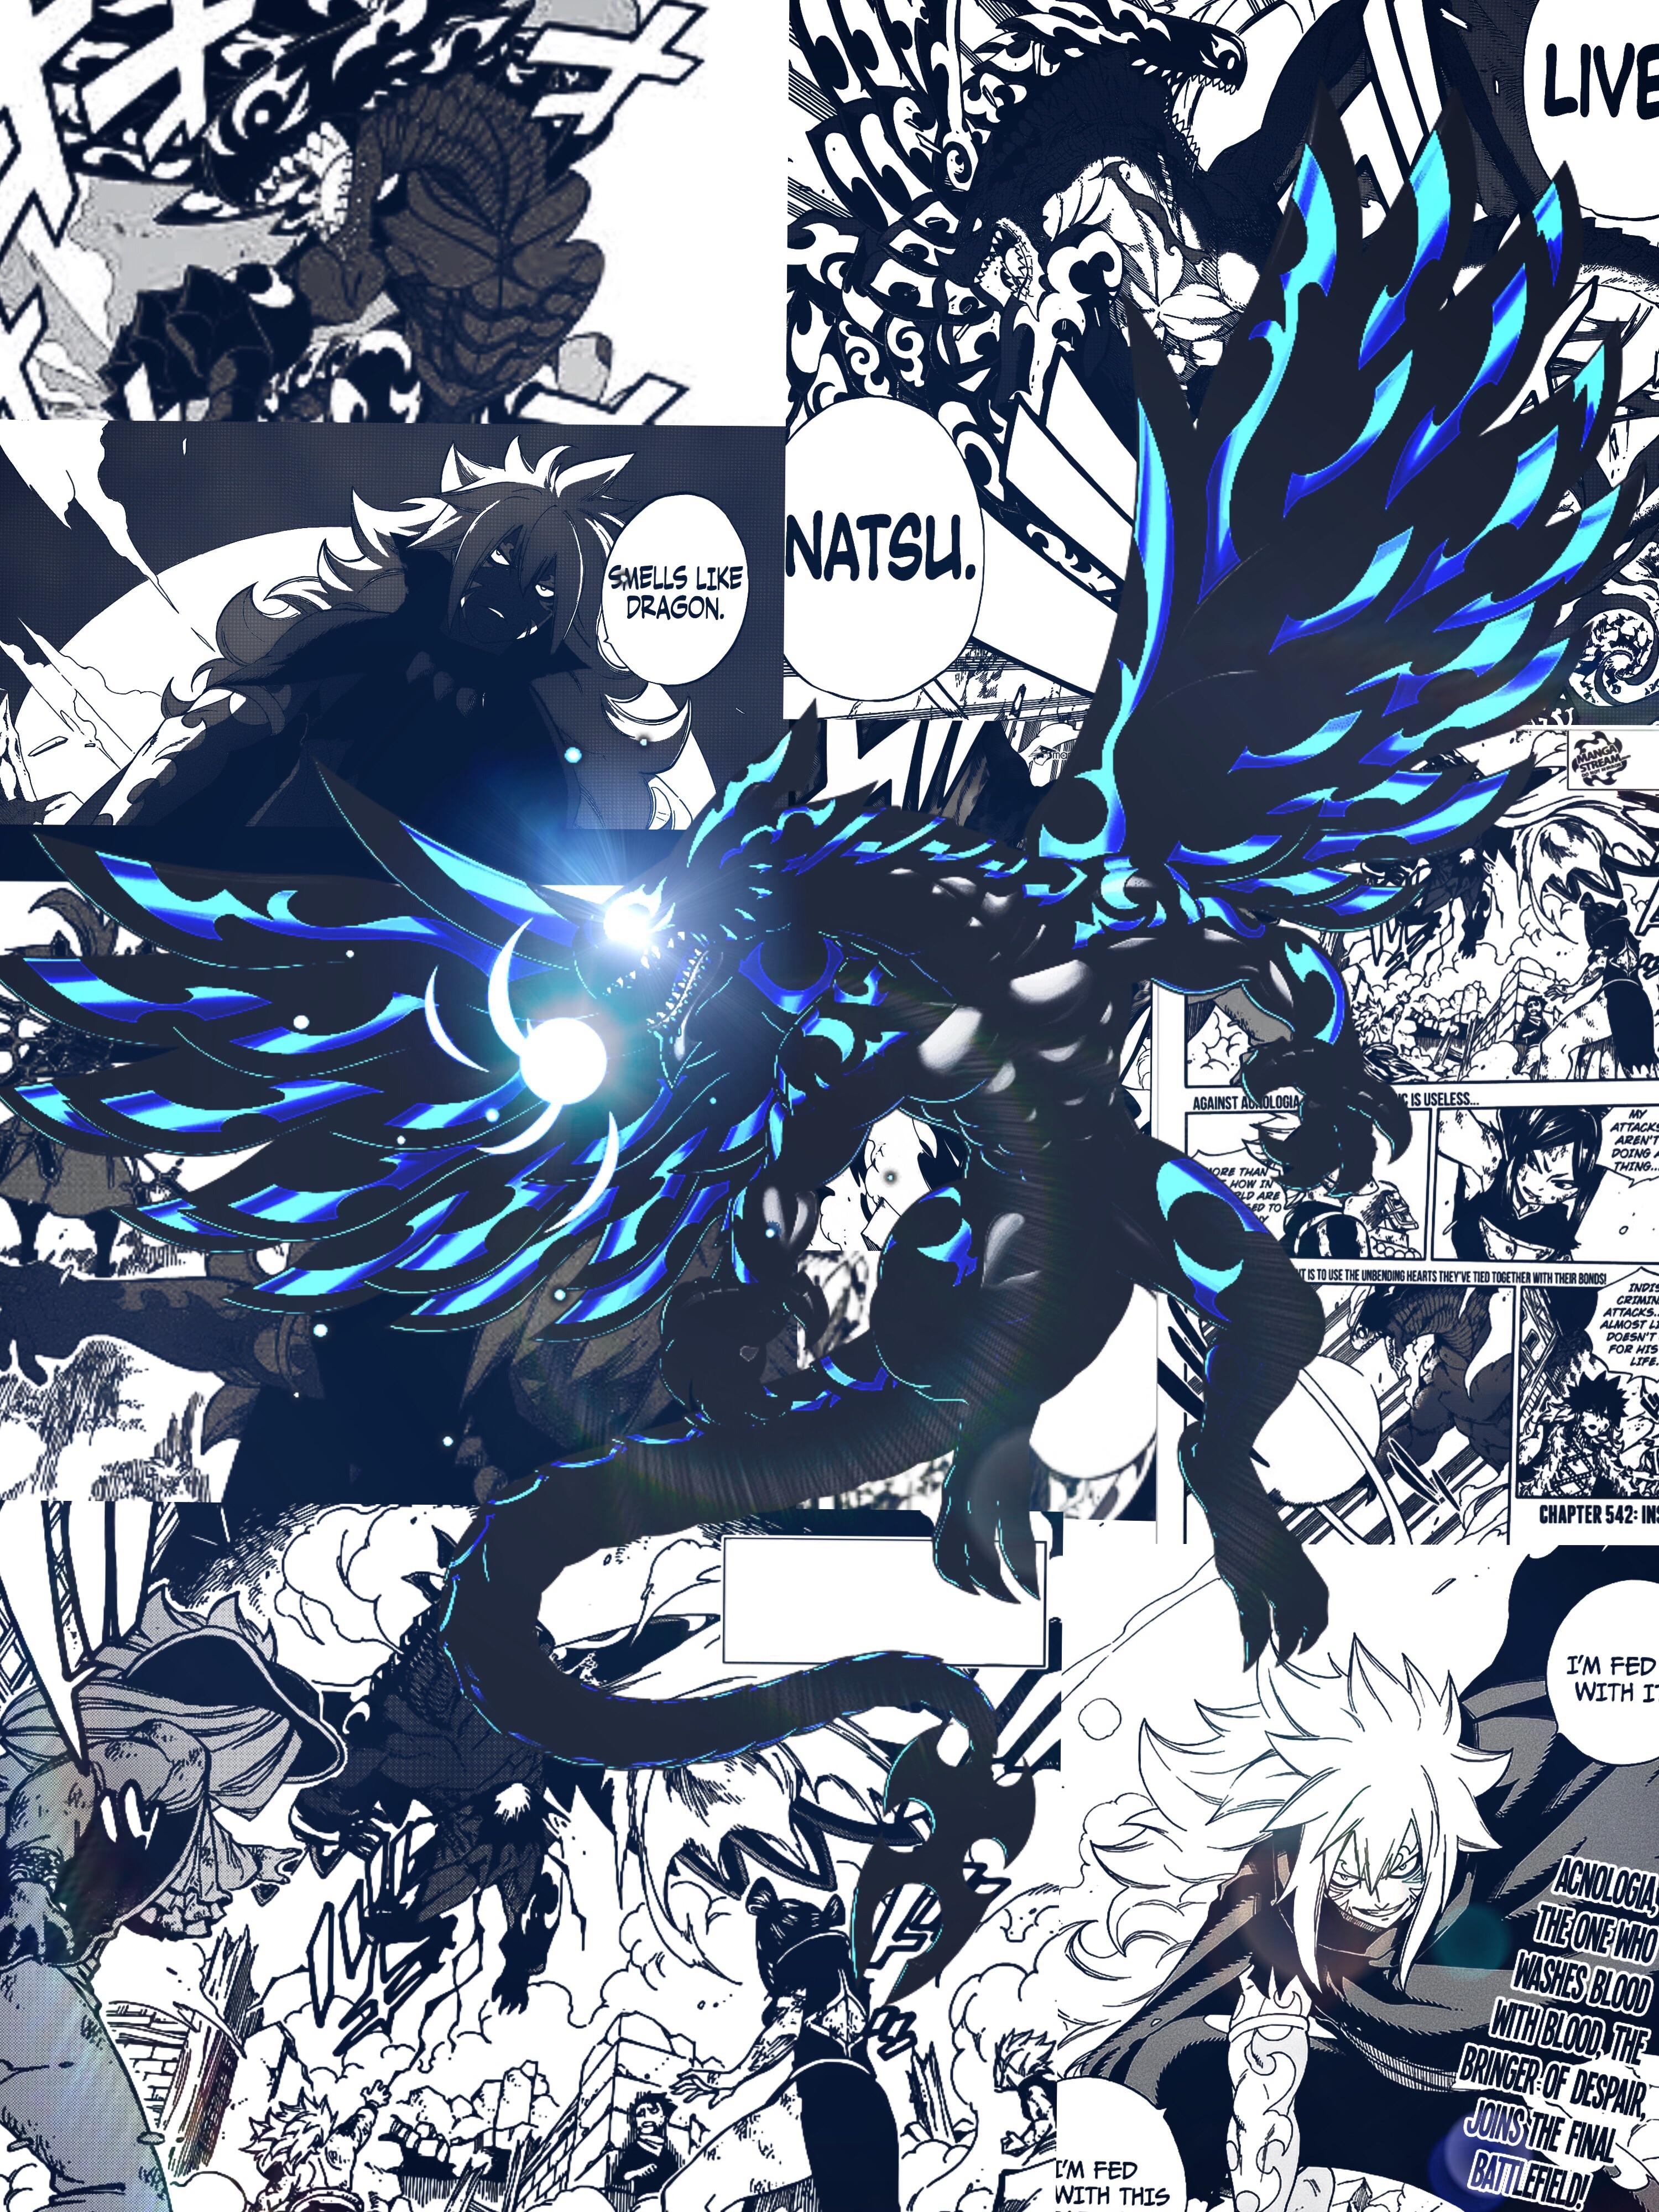 Acnologia  Wikia Fairy Tail tiếng Việt  Fandom